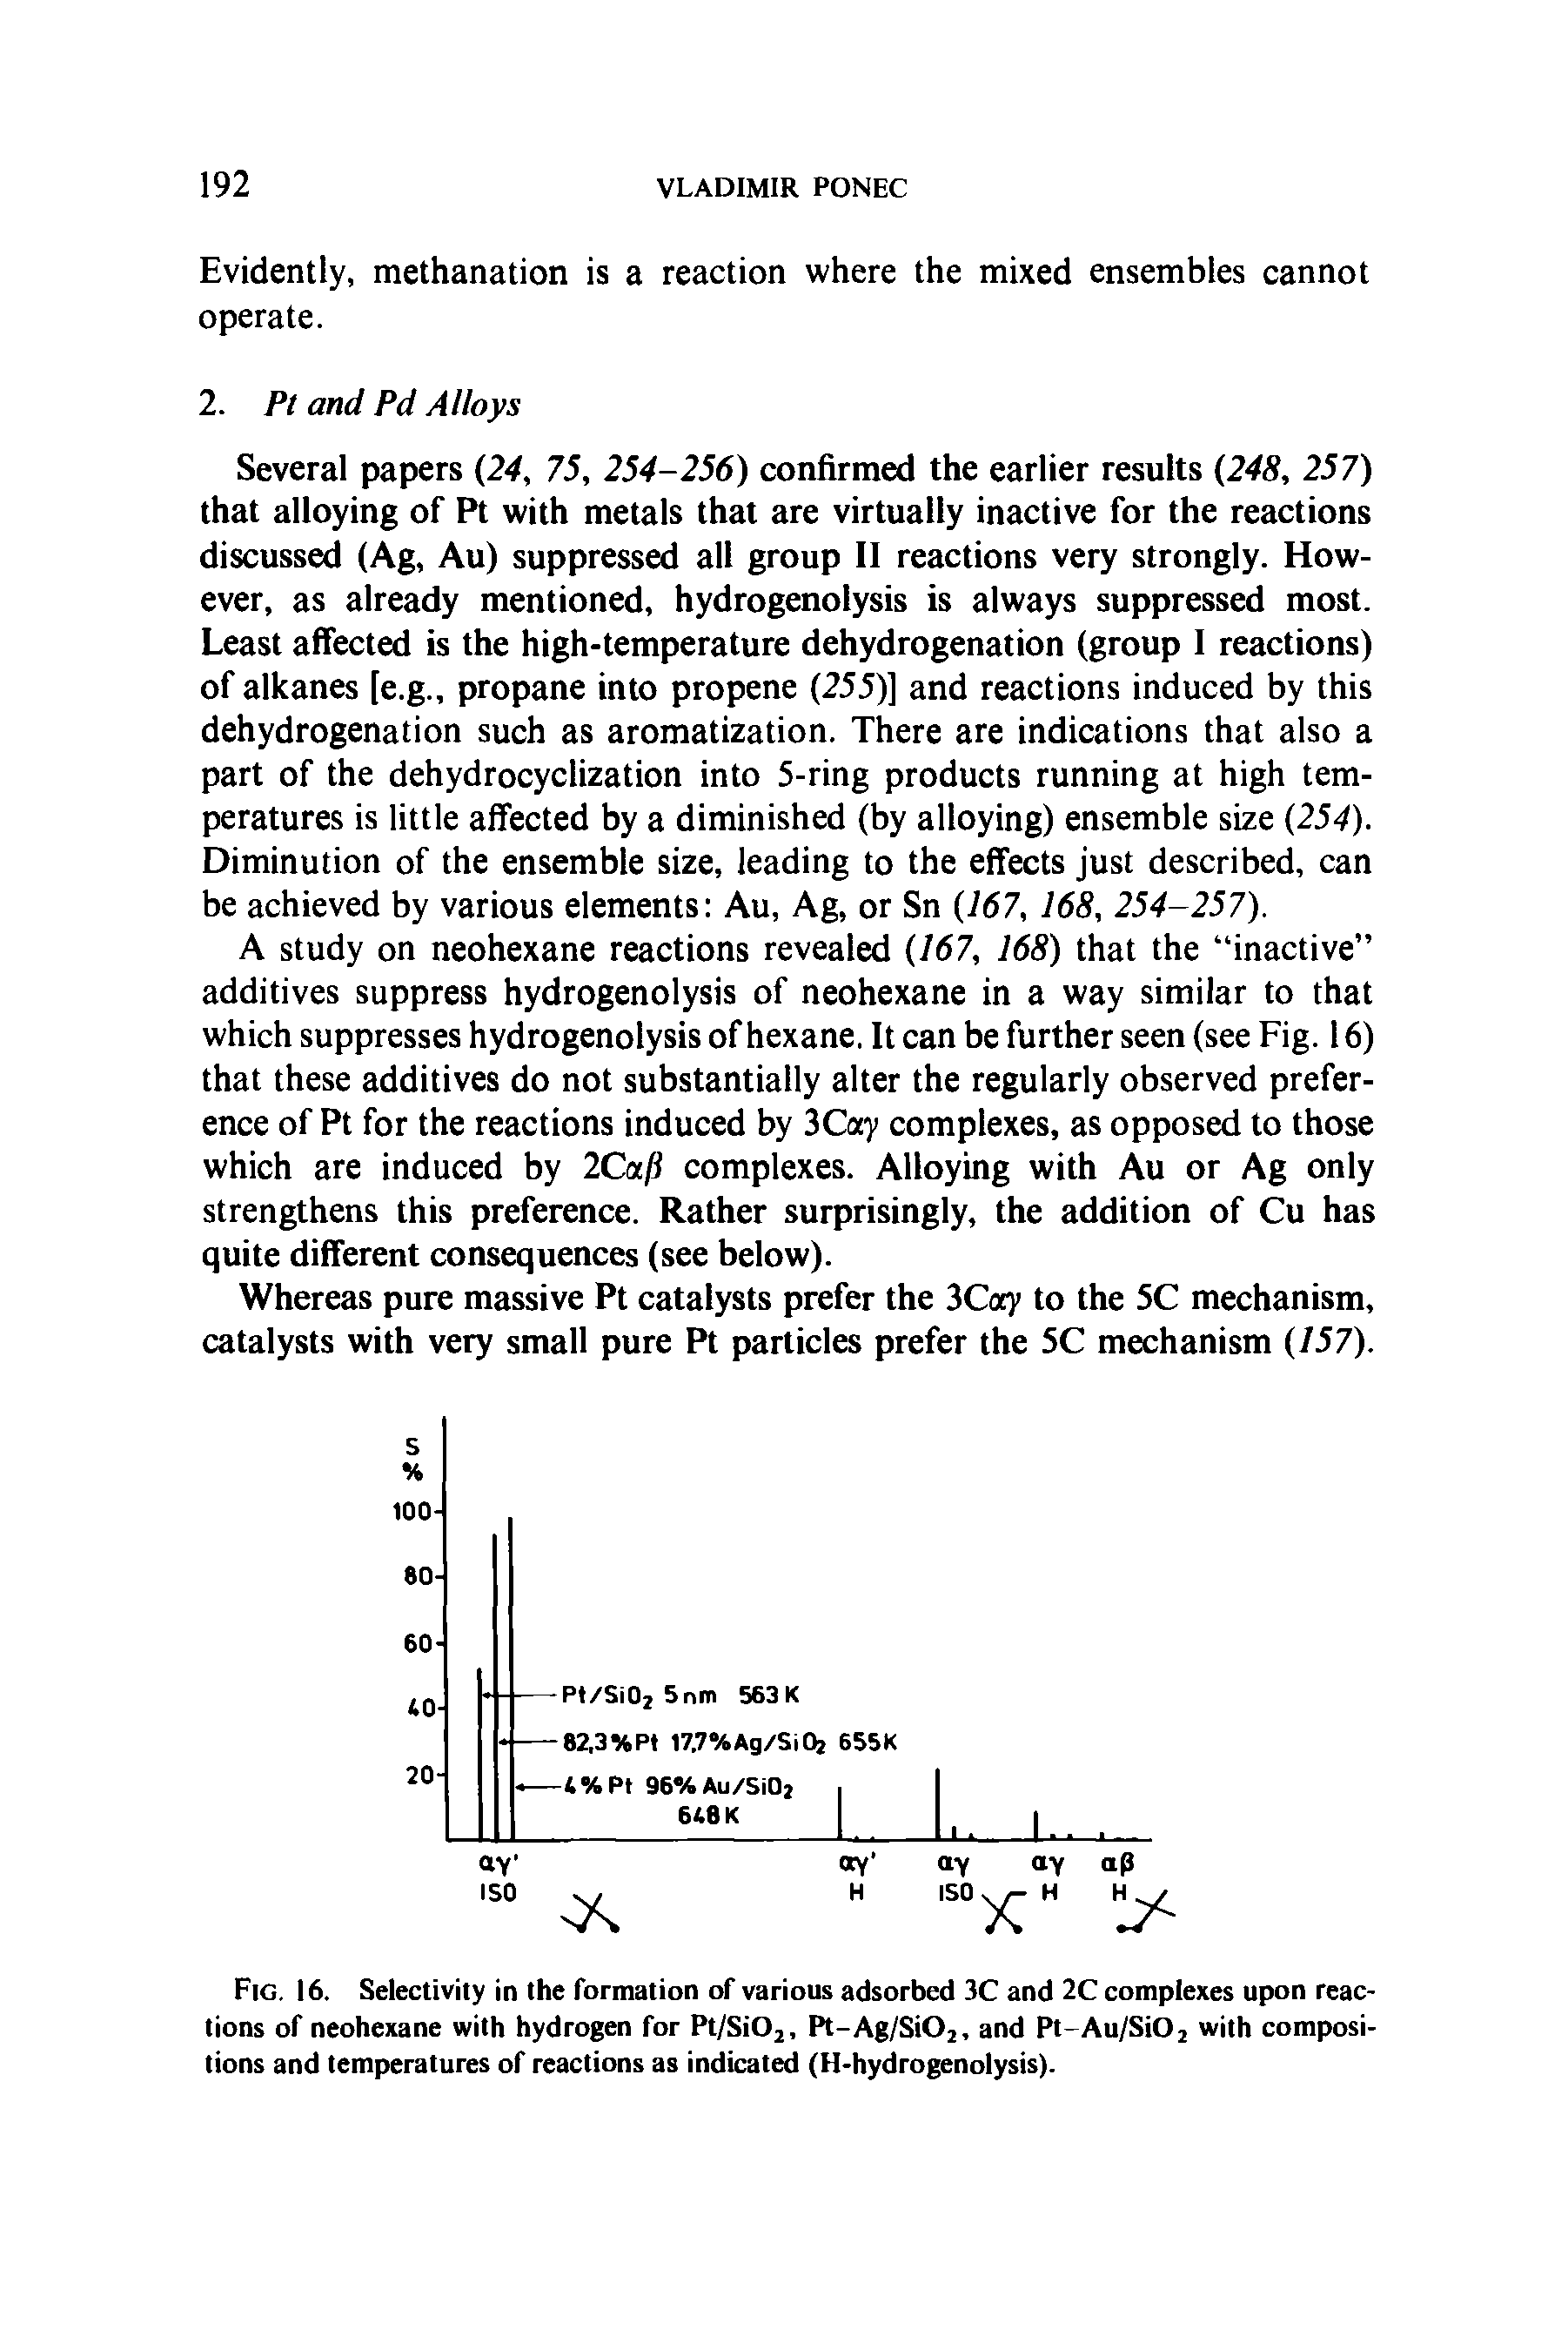 Fig. 16. Selectivity in the formation of various adsorbed 3C and 2C complexes upon reactions of neohexane with hydrogen for Pt/Si02, Pt-Ag/Si02, and Pt-Au/Si02 with compositions and temperatures of reactions as indicated (H-hydrogenolysis).